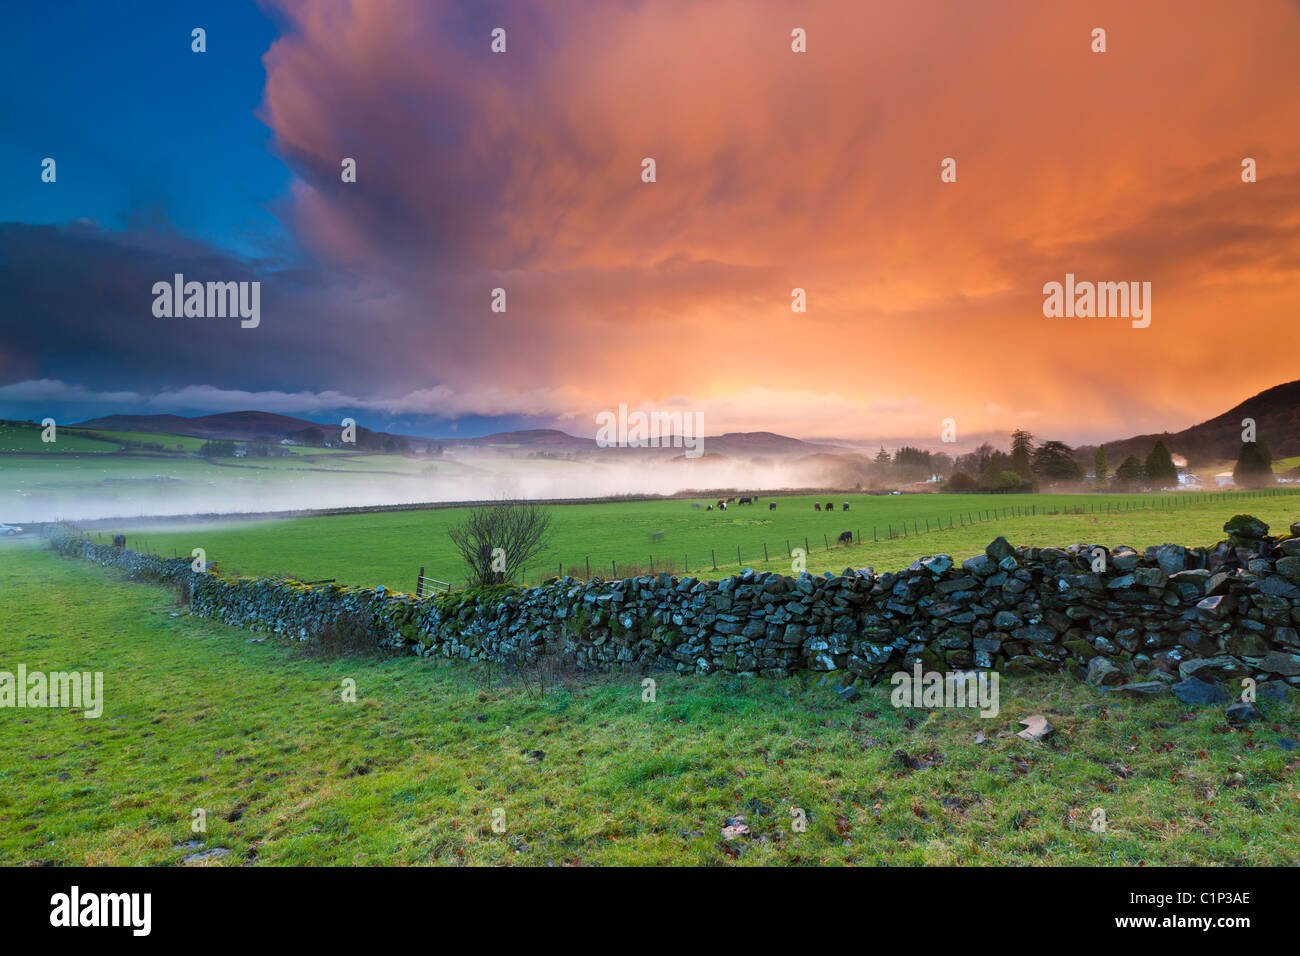 Sunrise over Crake Valley, Lowick, Lake District National Park, Cumbria, England, Europe Stock Photo